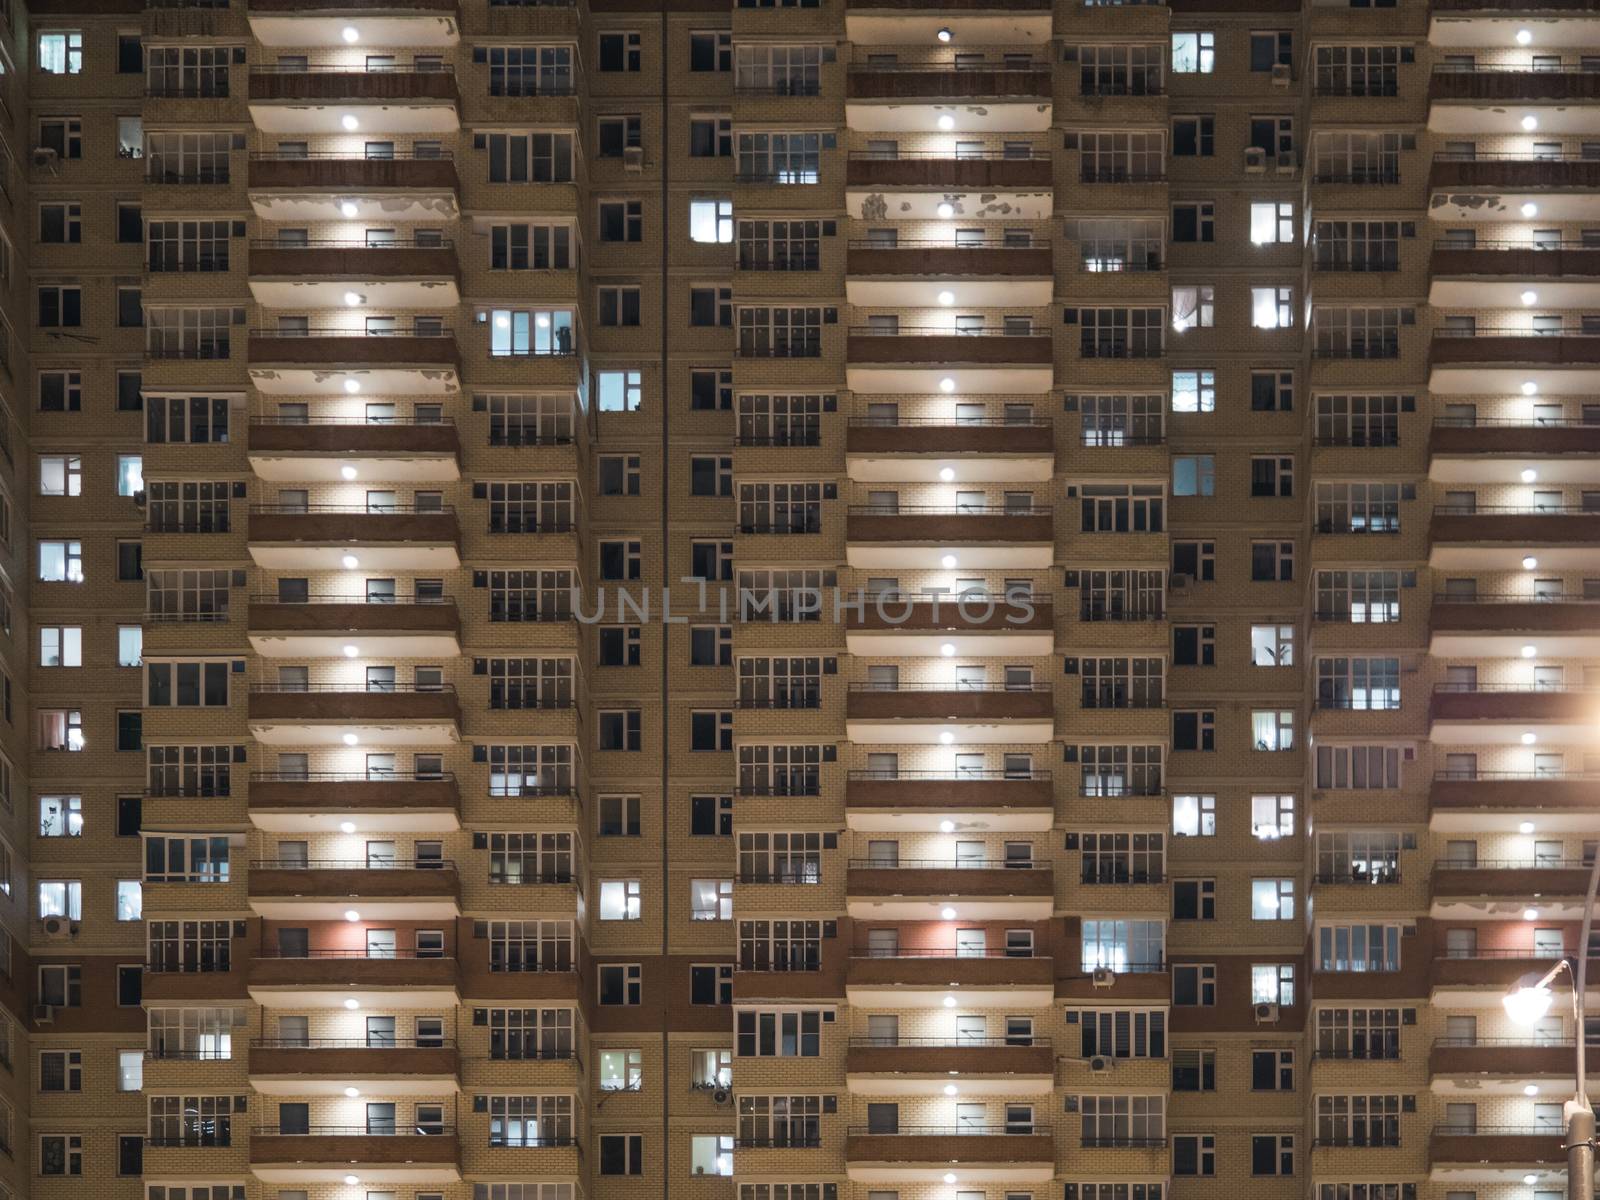 Night view of exterior apartment building. High rise apartments in night light